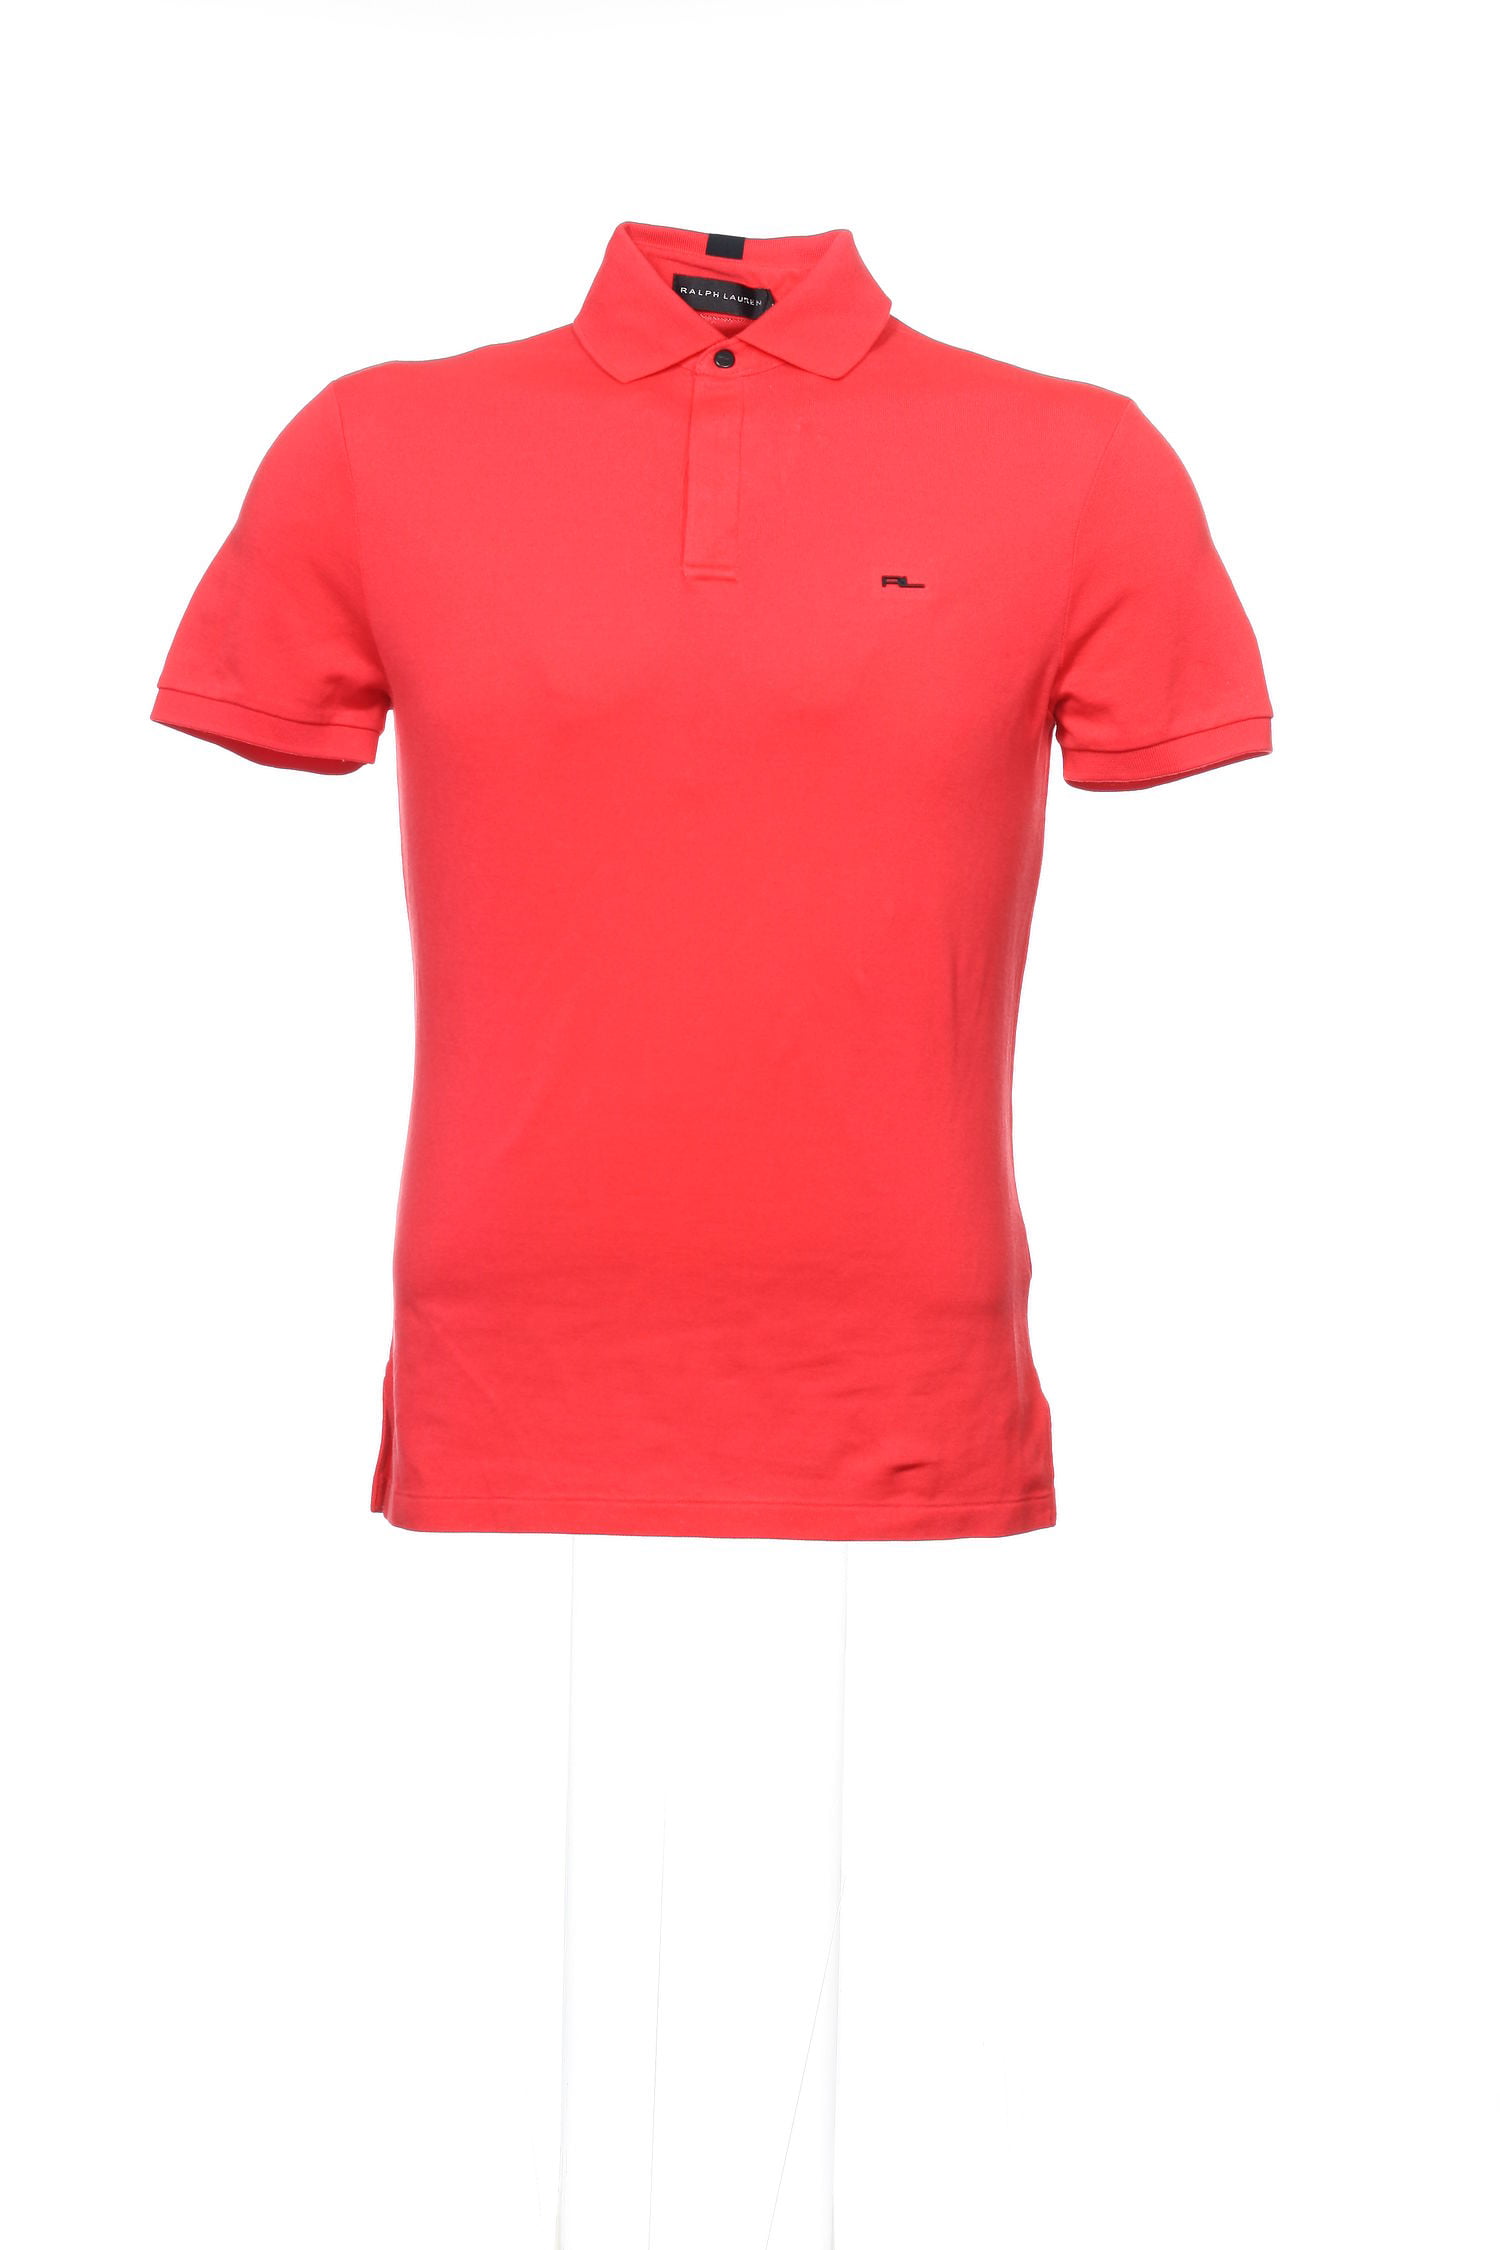 red and black ralph lauren polo shirt